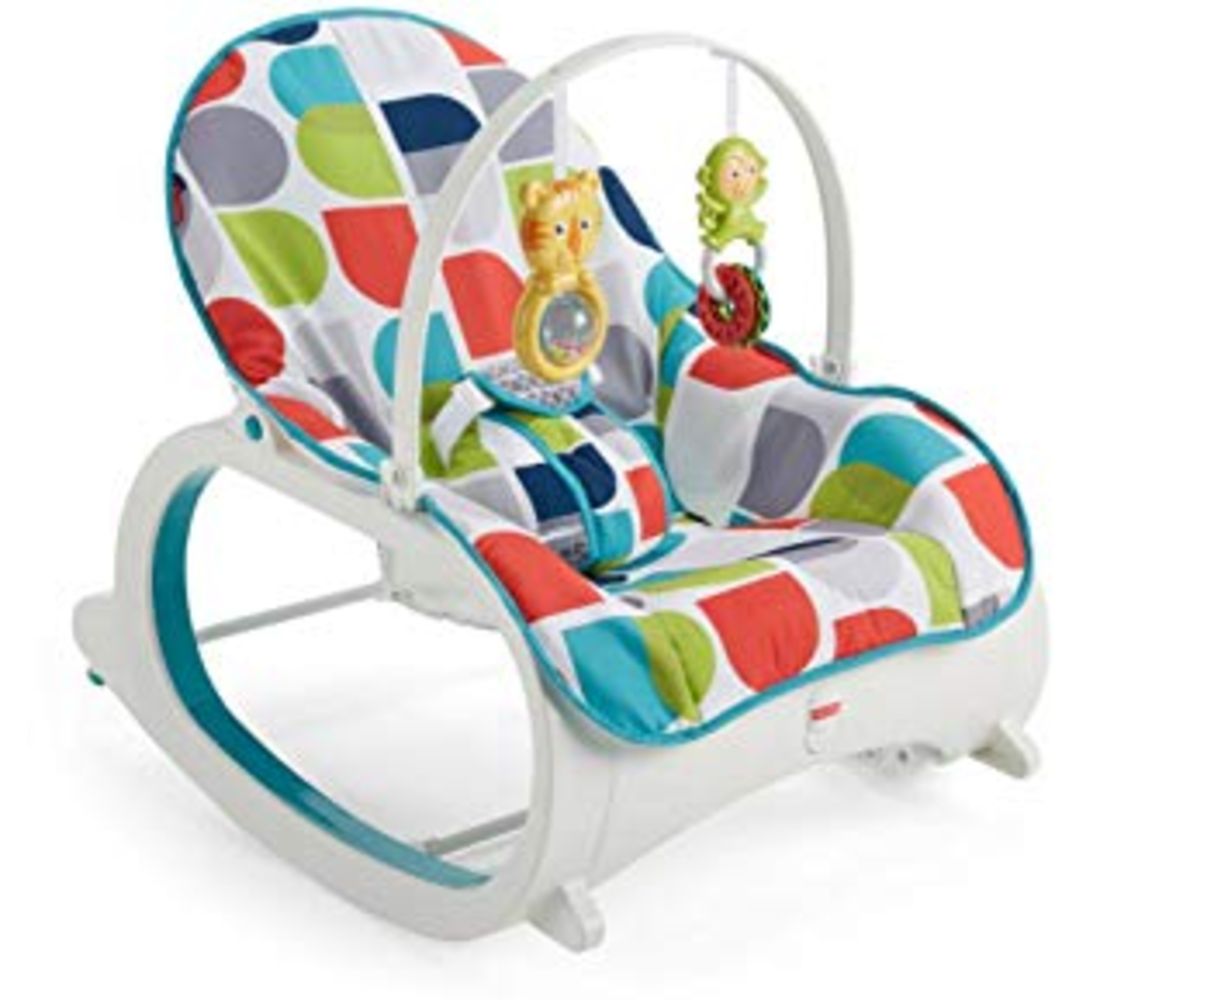 New Delivery Sourced from Mothercare, A Large Selection of Nursery & Toddler Products...